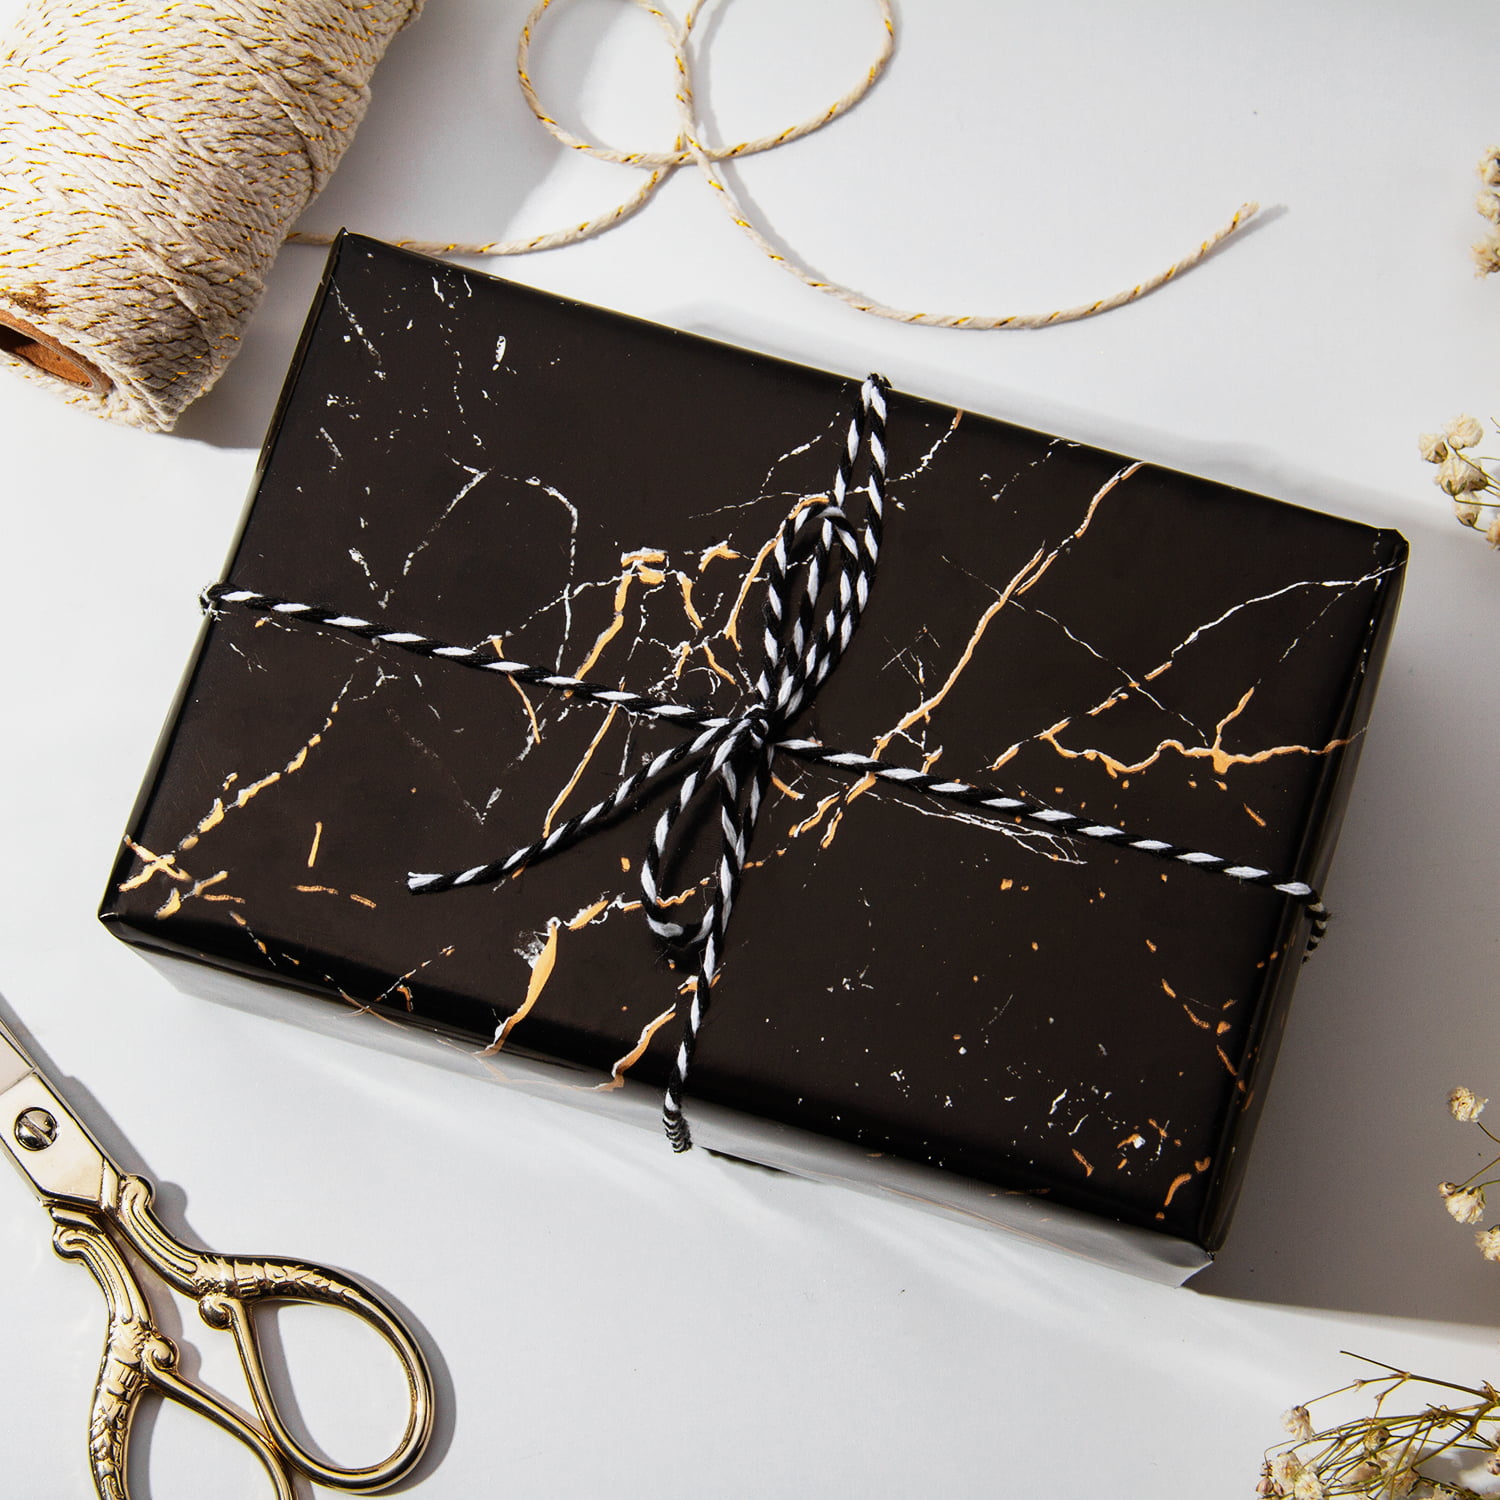 Black & Gold Gift Wrapping Papers - 12 Sheets (9780804852104